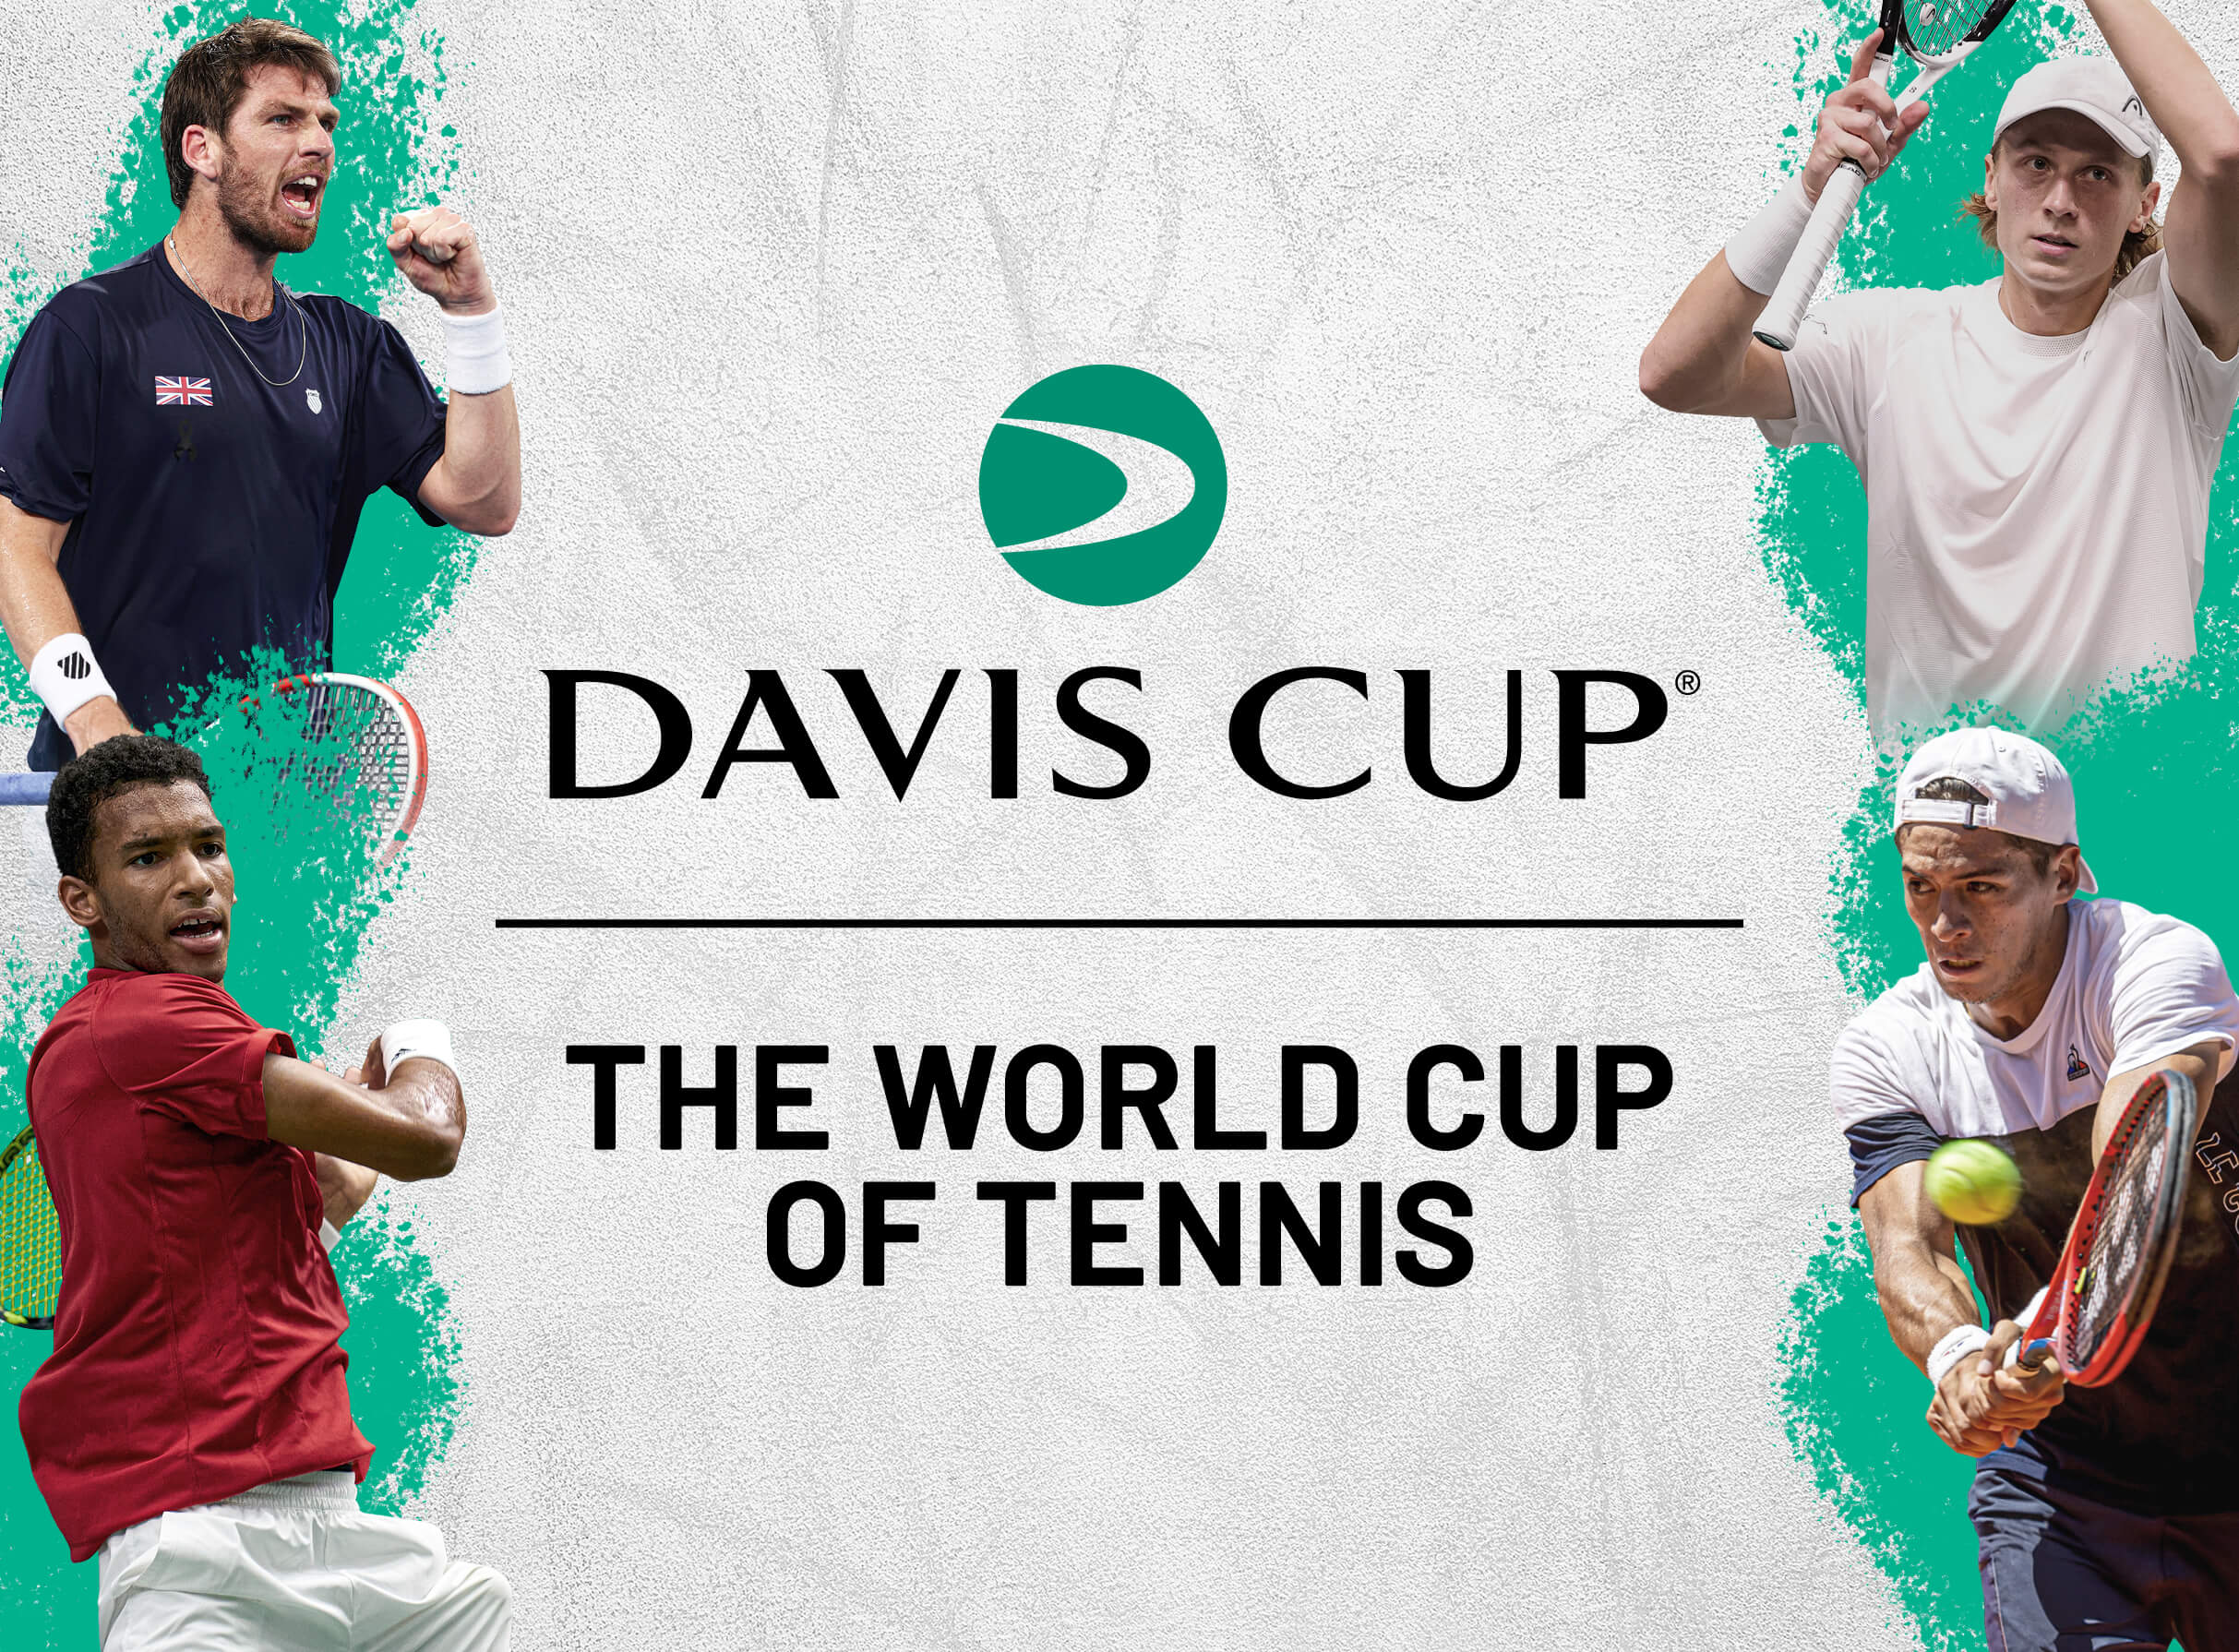 Davis Cup Group Stage Finals: Finland v Great Britain in Manchester promo photo for Lta Members presale offer code